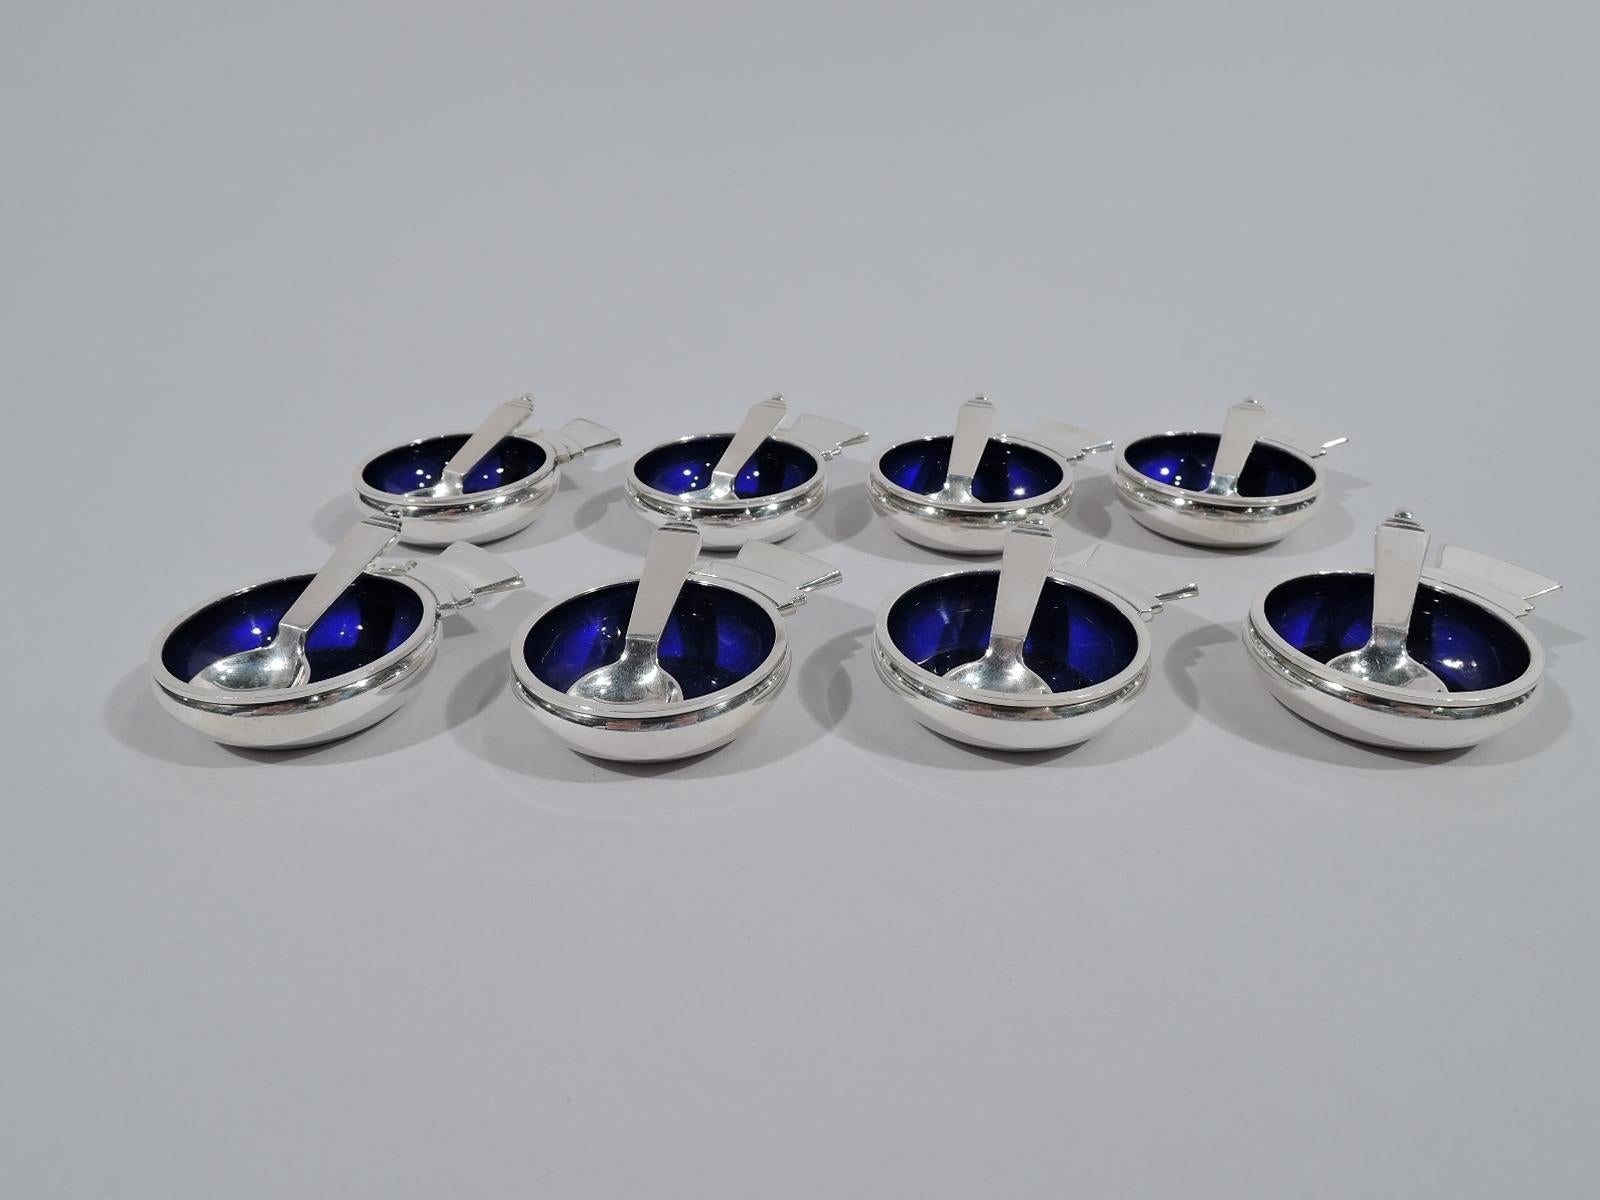 Art Deco Set of 8 Georg Jensen Pyramid Sterling Silver and Enamel Open Salts and Spoons